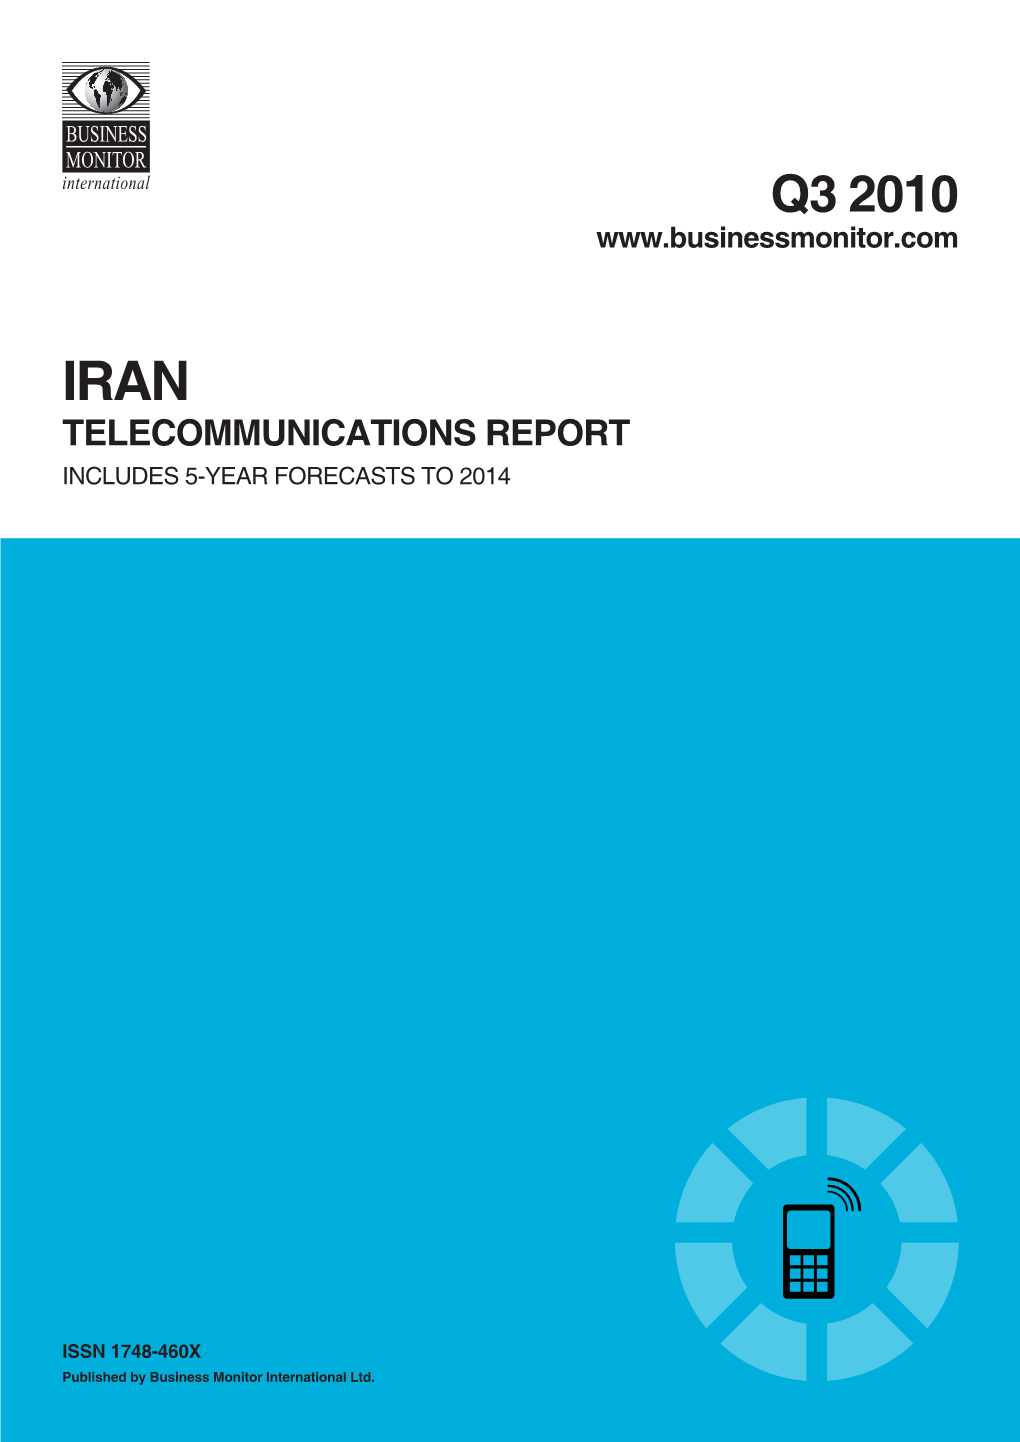 Q3 2010 Iran Telecommunications Report INCLUDES 5-YEAR FORECASTS to 2014